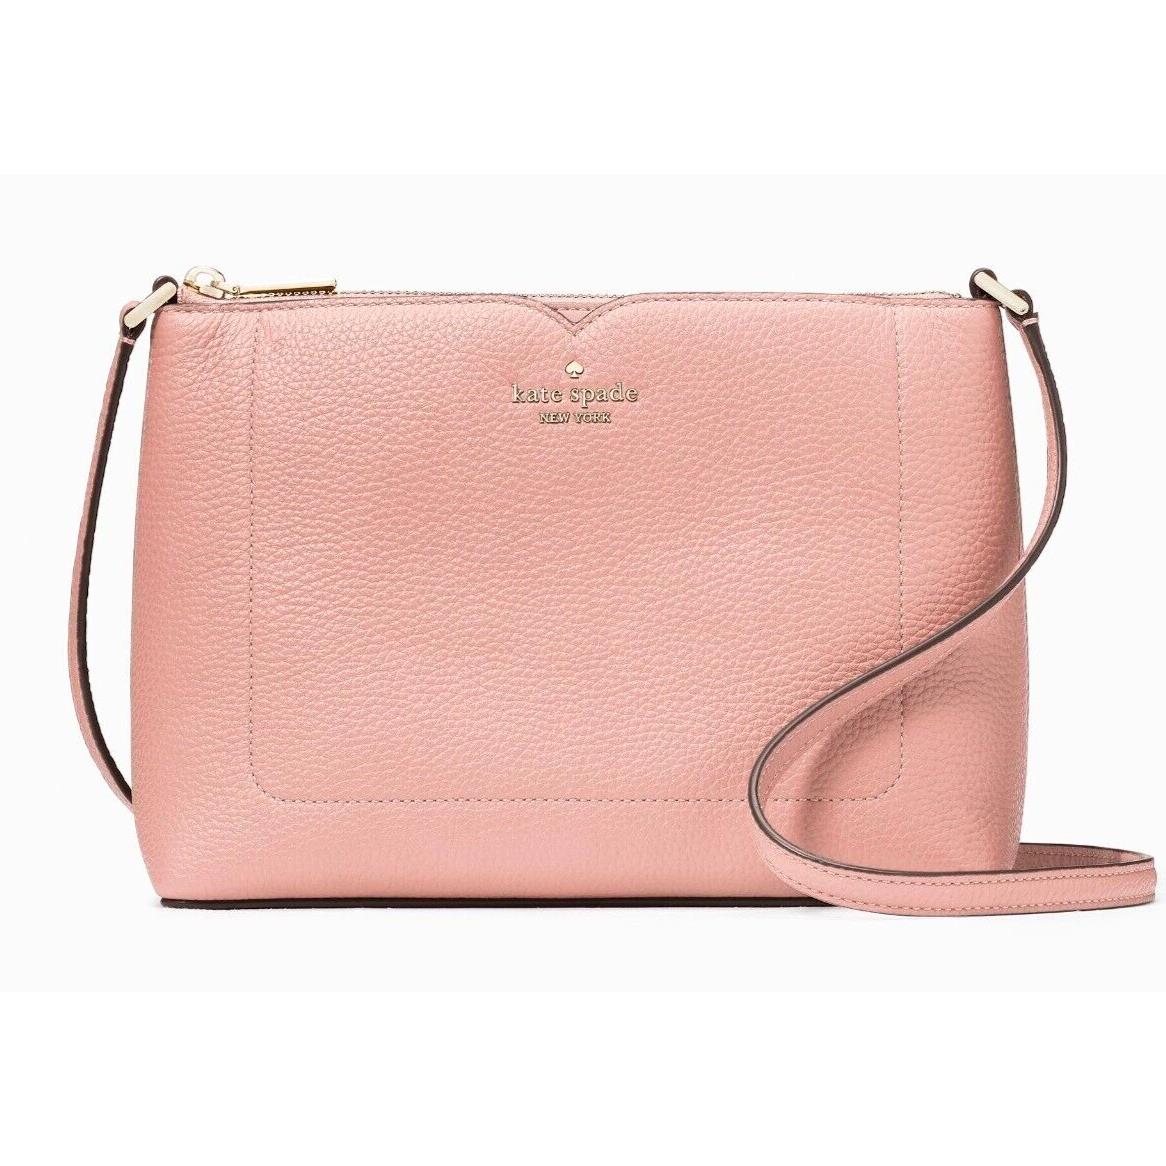 New Kate Spade Harlow Pebble Leather Crossbody Tea Rose with Dust Bag Included